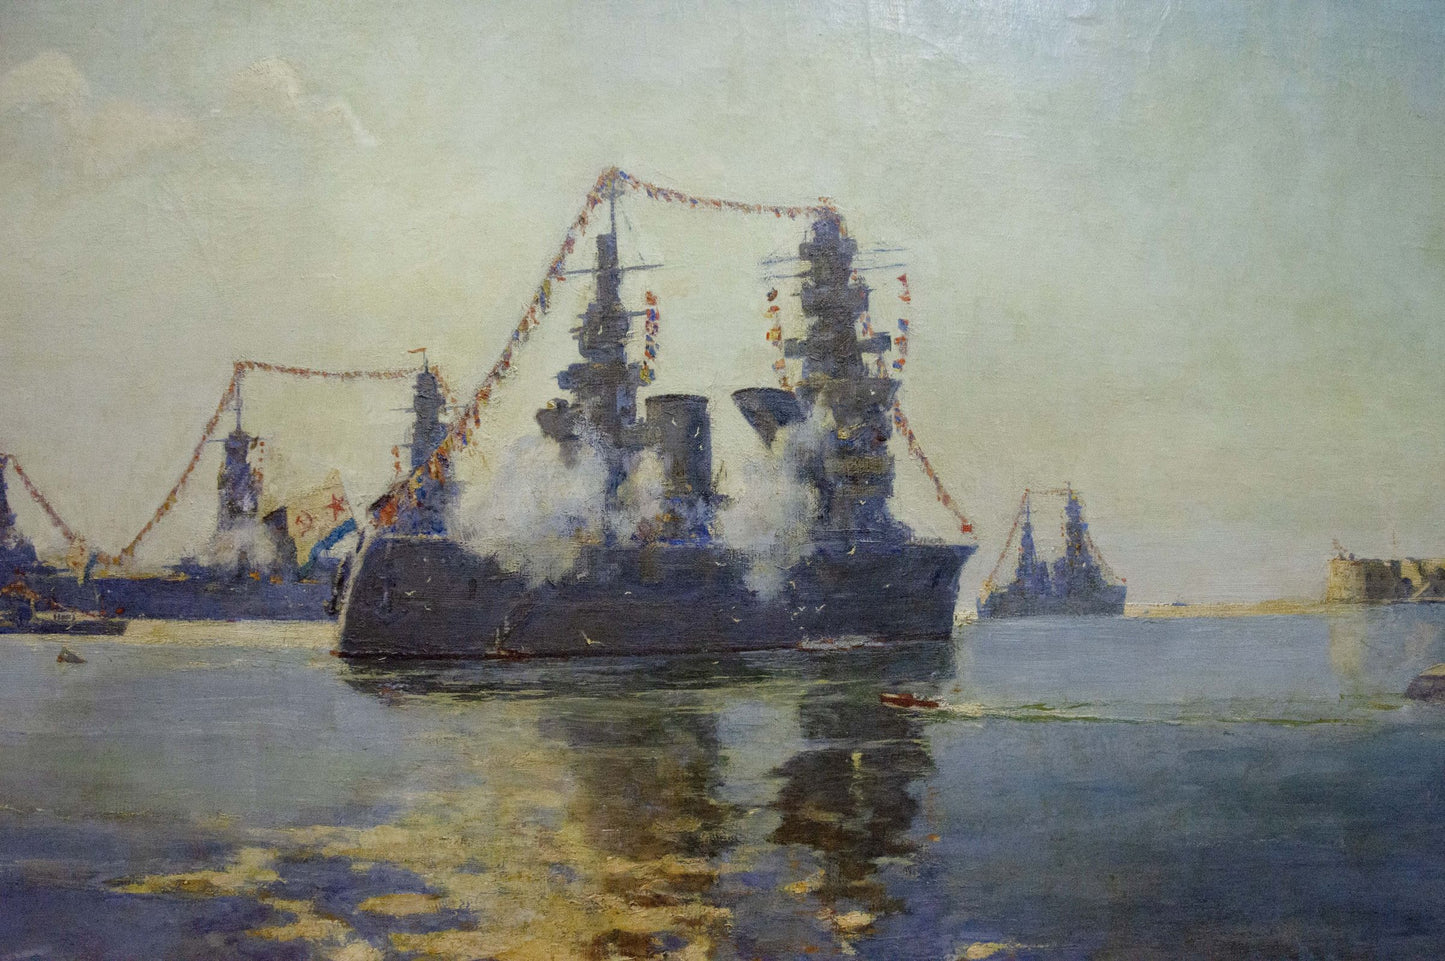 Oil painting Landscape with ships Vladimirov Sergey Sidorovich